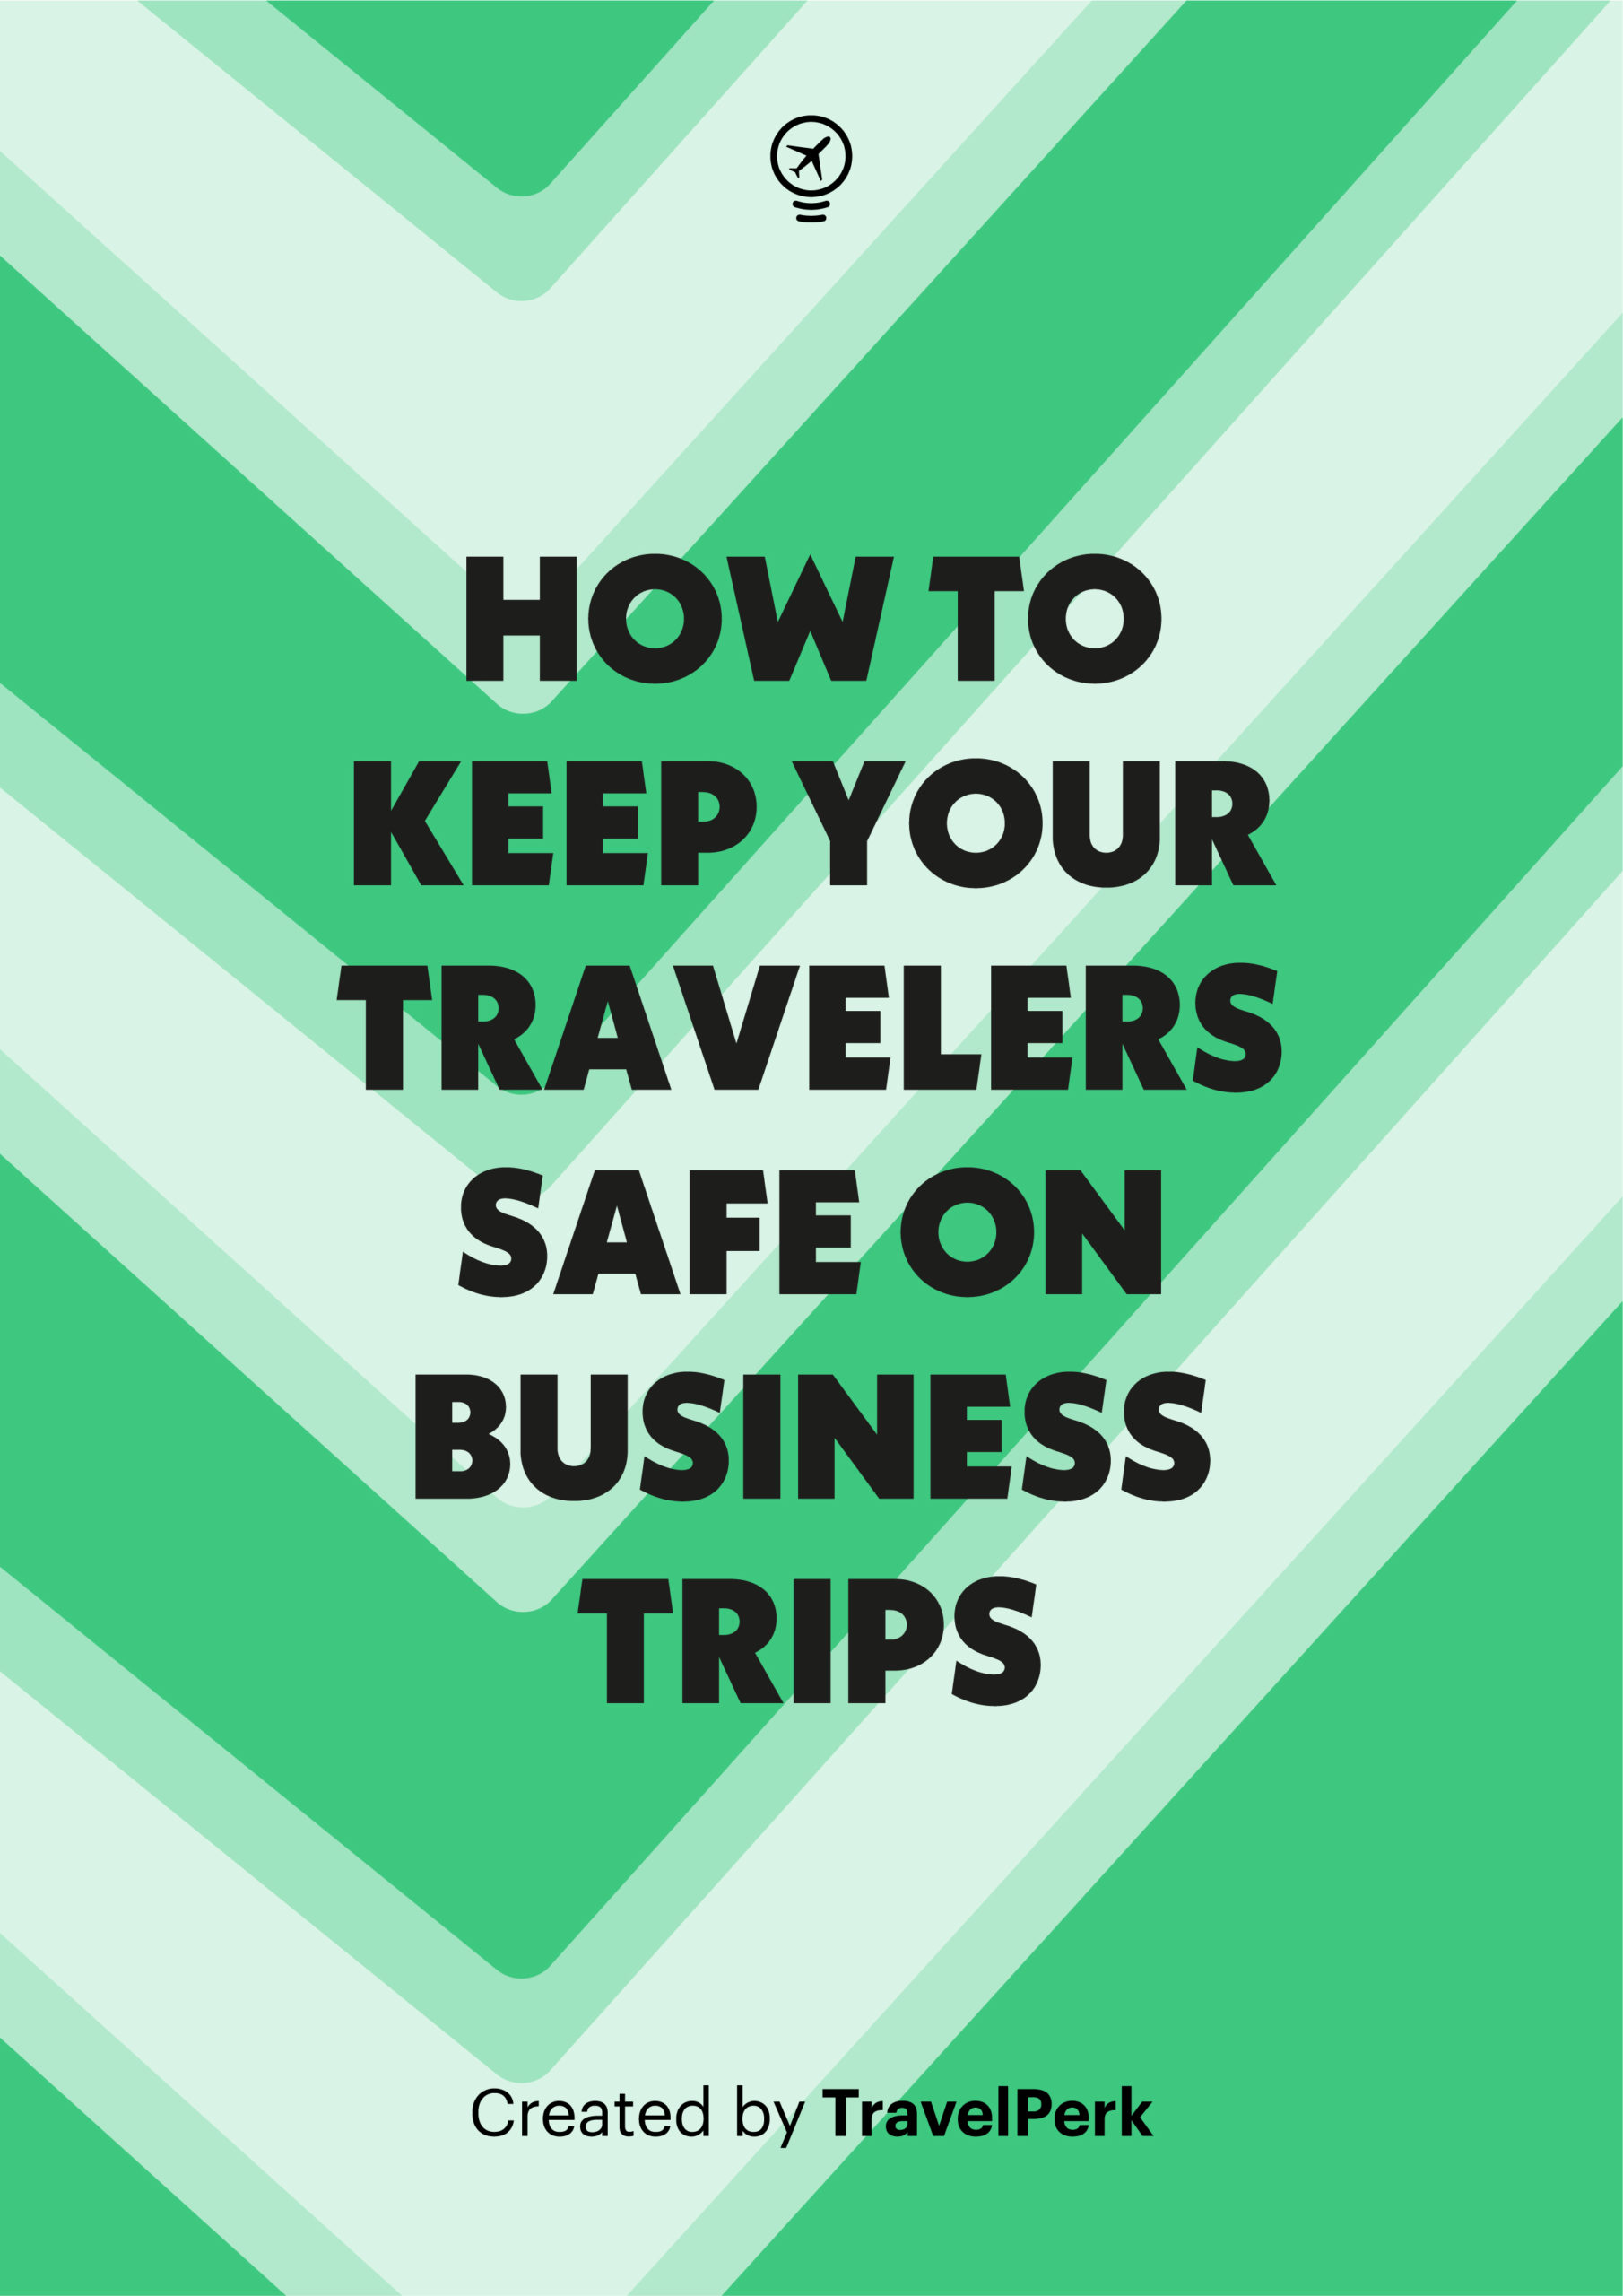 How to keep your travelers safe on business trips